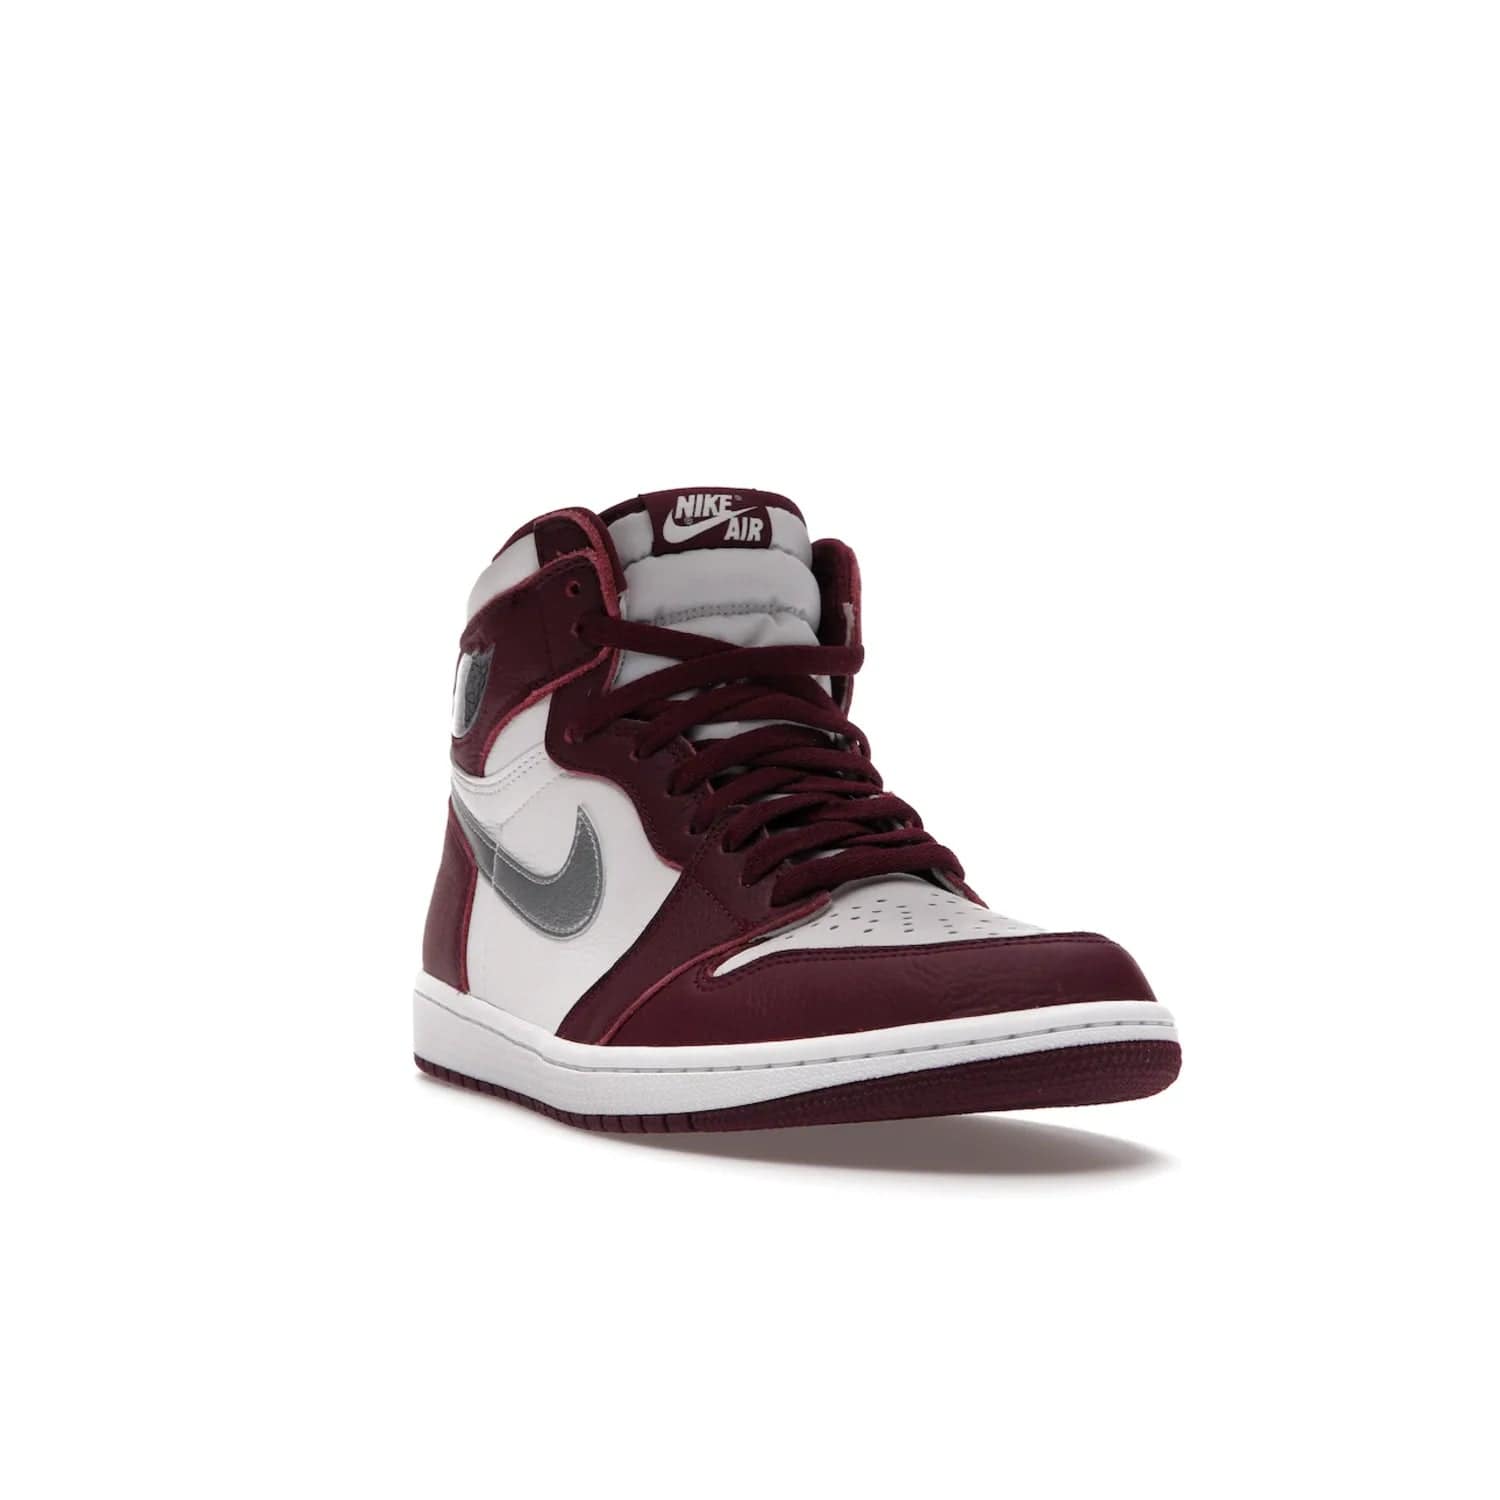 Jordan 1 Retro High OG Bordeaux - Image 7 - Only at www.BallersClubKickz.com - Shop the classic Air Jordan 1 High Bordeaux with a modern high-top cut. The timeless Bordeaux and White-Metallic Silver colorway, releasing Nov 20, 2021, is perfect for practice or a night out.